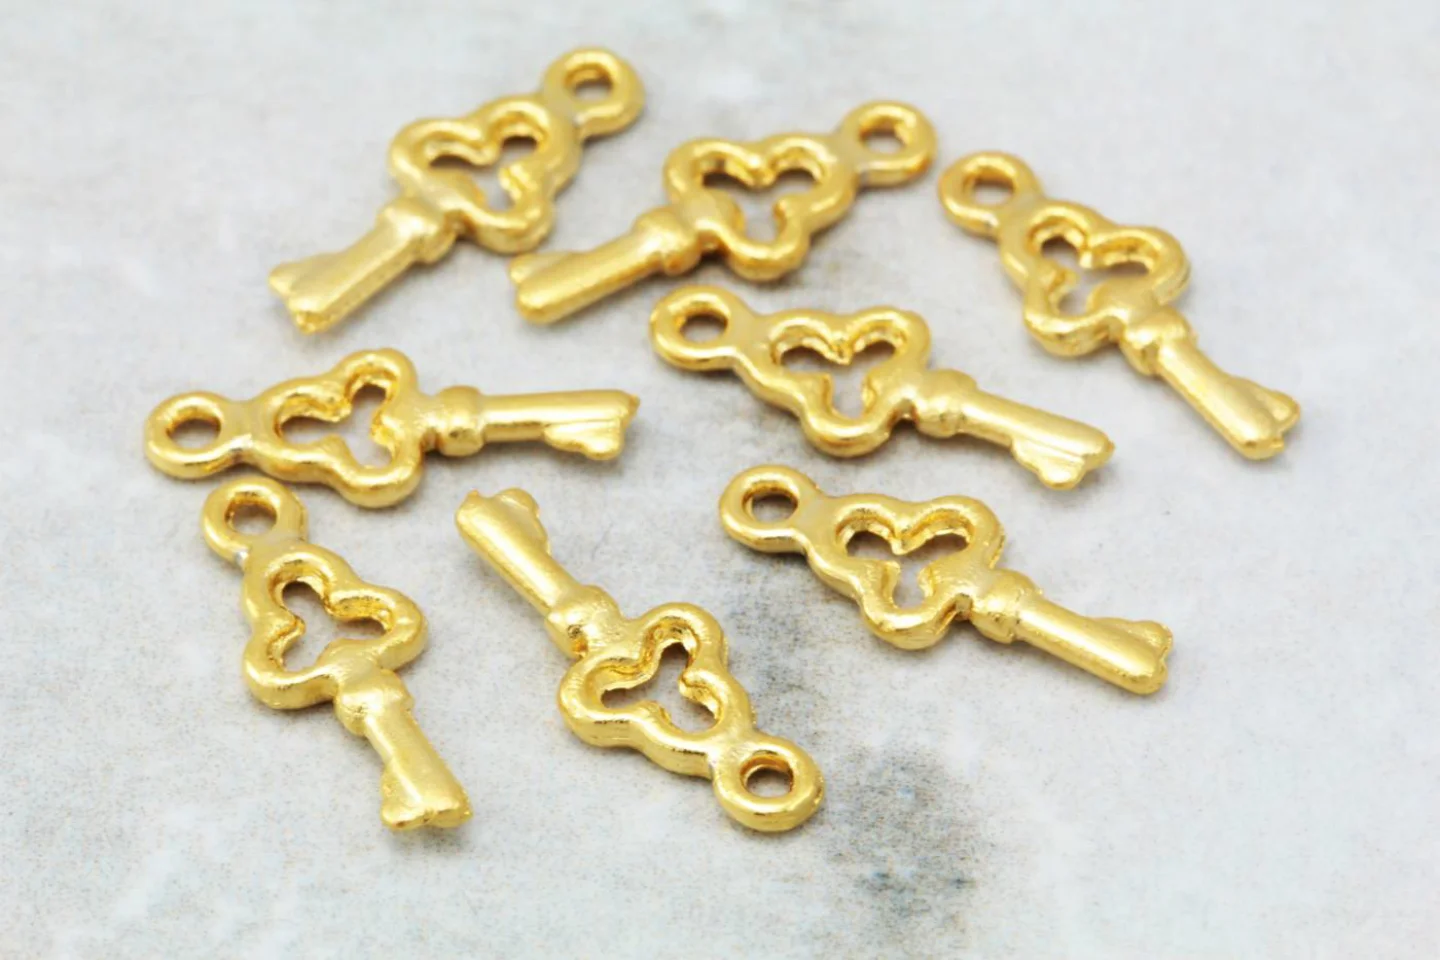 gold-plated-tiny-key-pendant-charms.